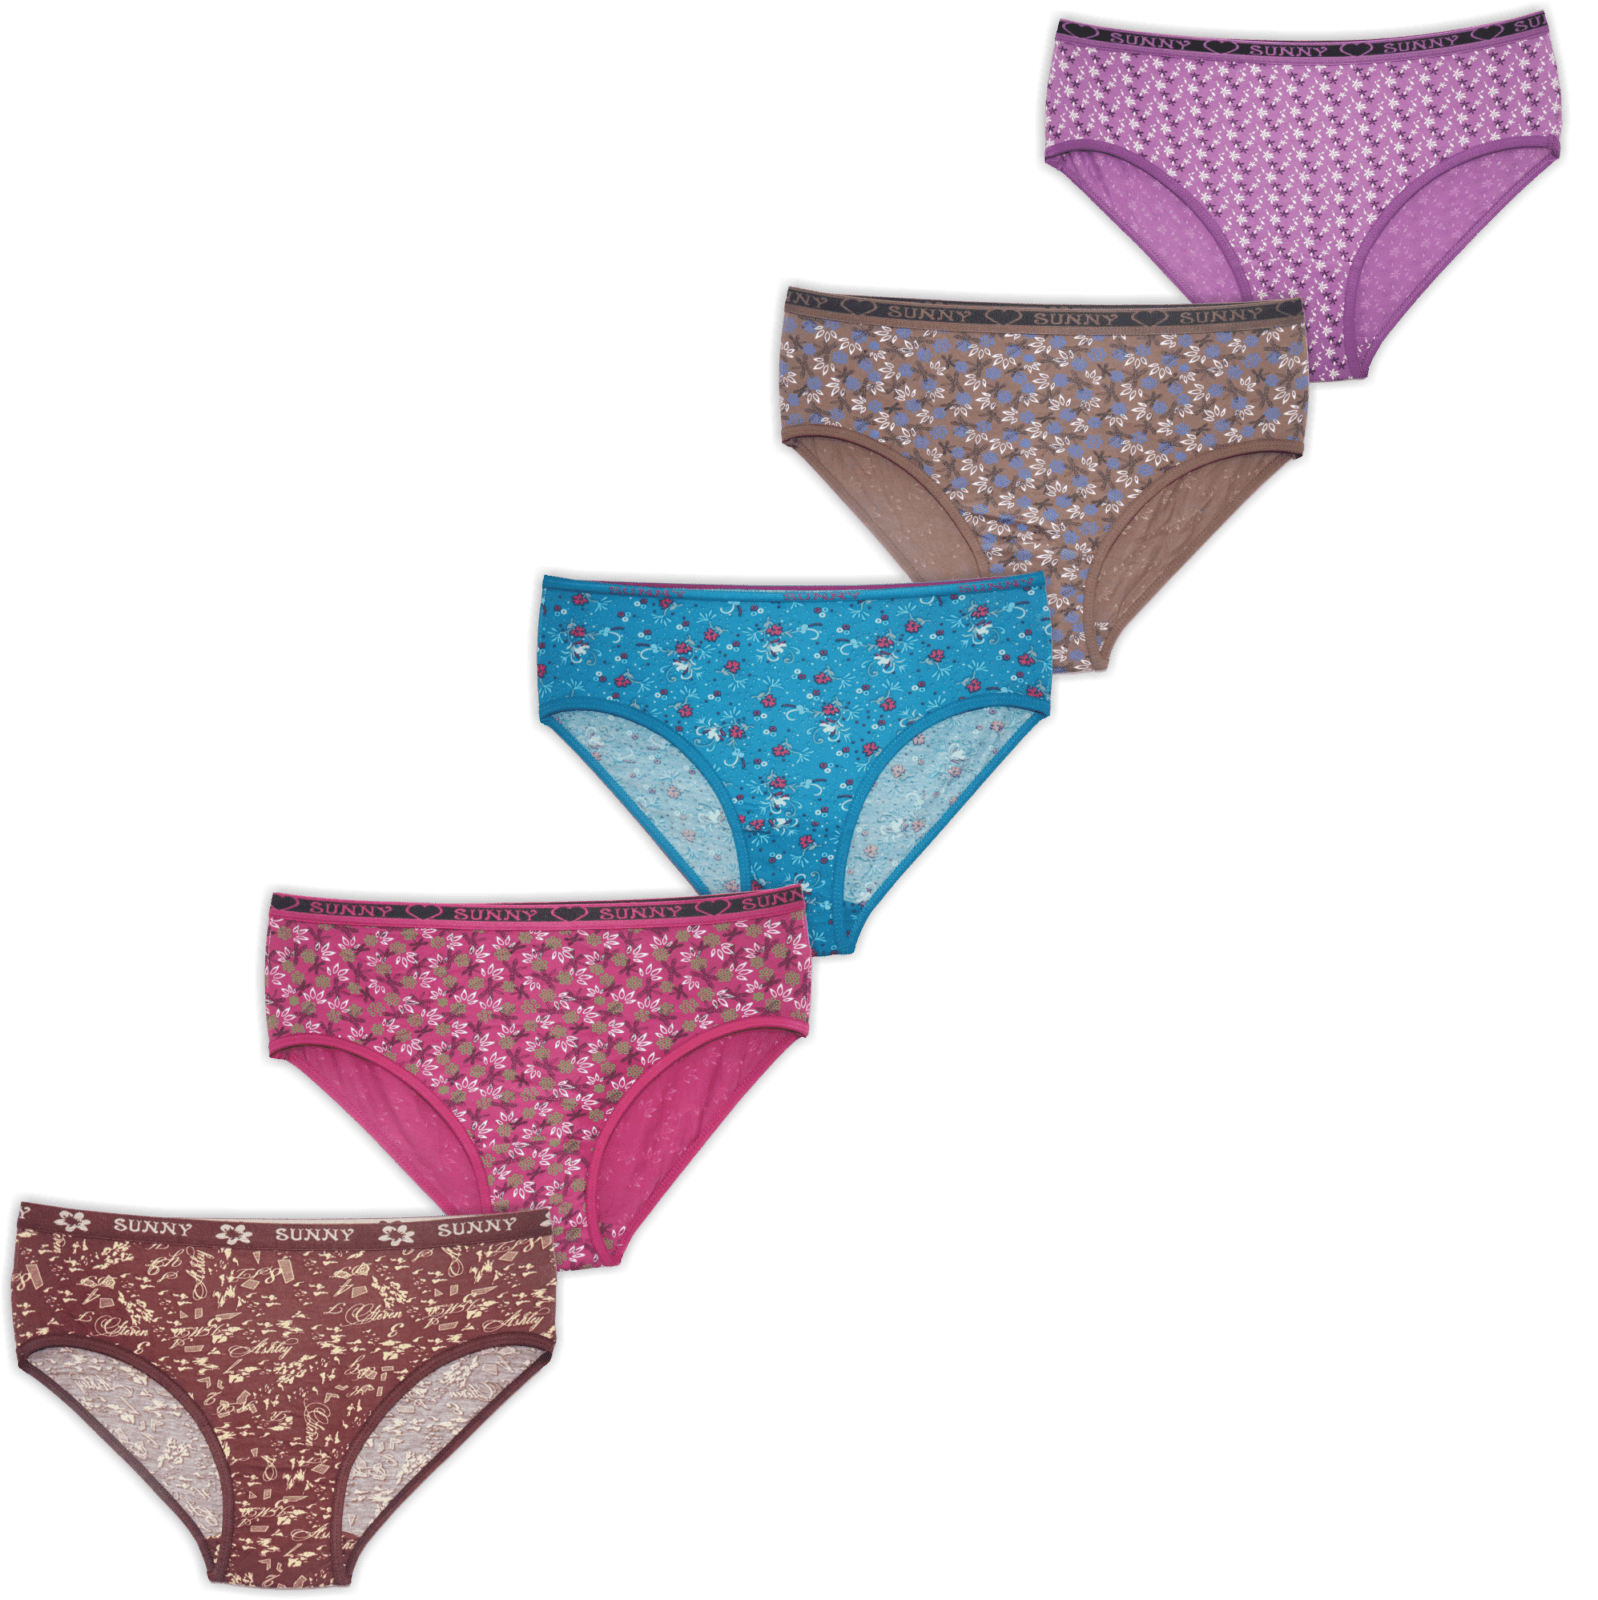 Sunny Lingerie's Ladies Panties Give The Best Comfort An